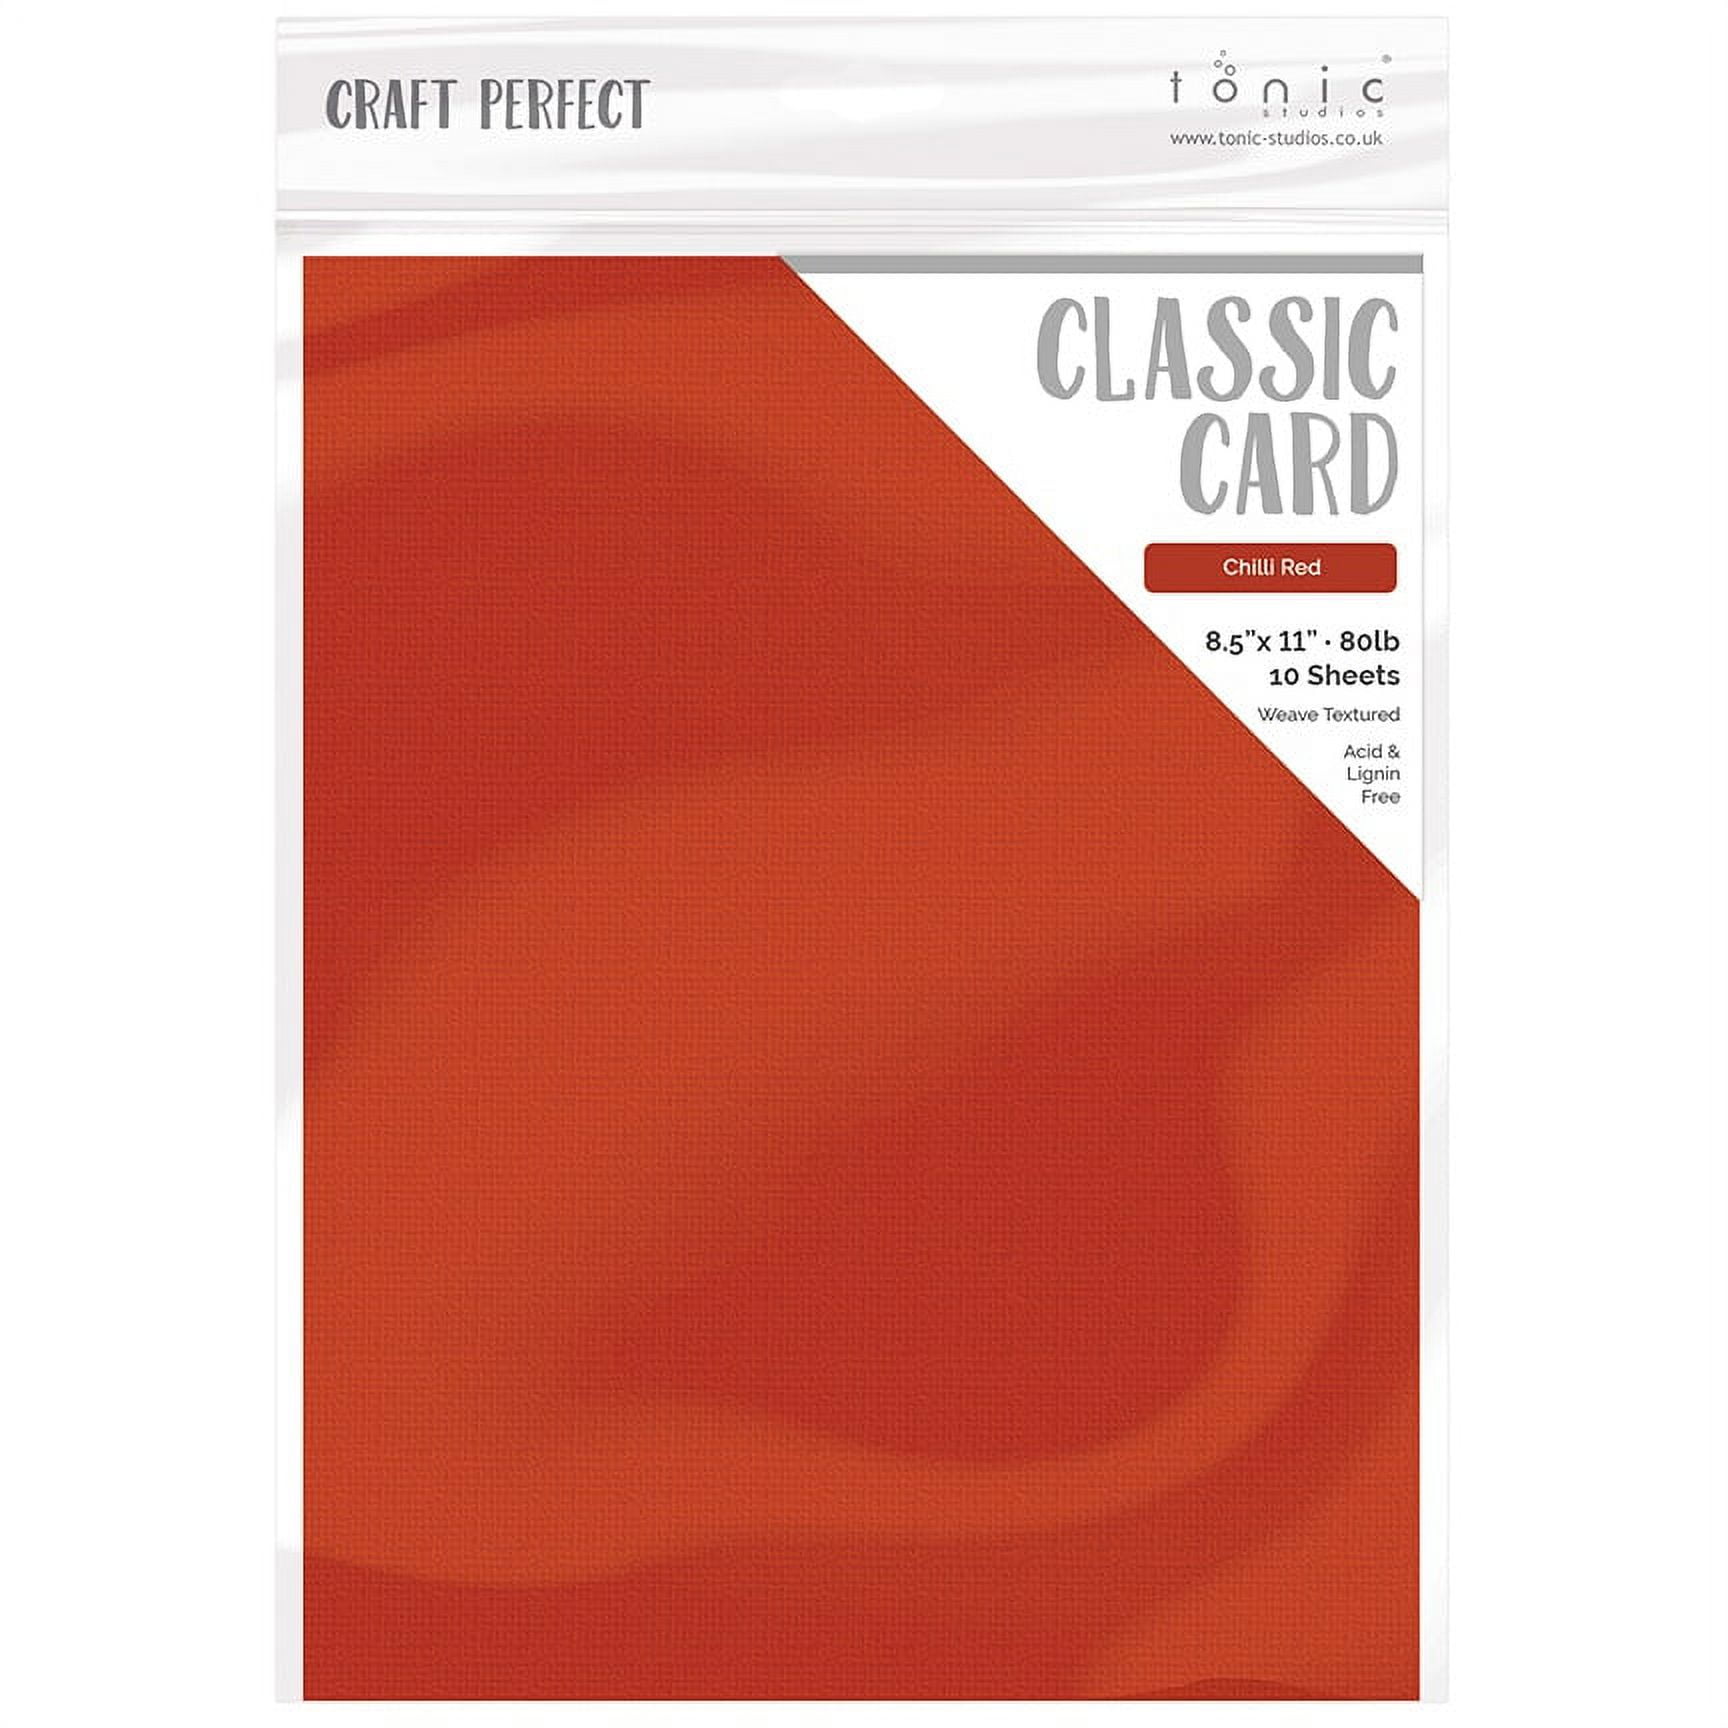 Craft Perfect Weave Textured Classic Card 8.5 inchx11 inch 10/Pkg-Chilli Red